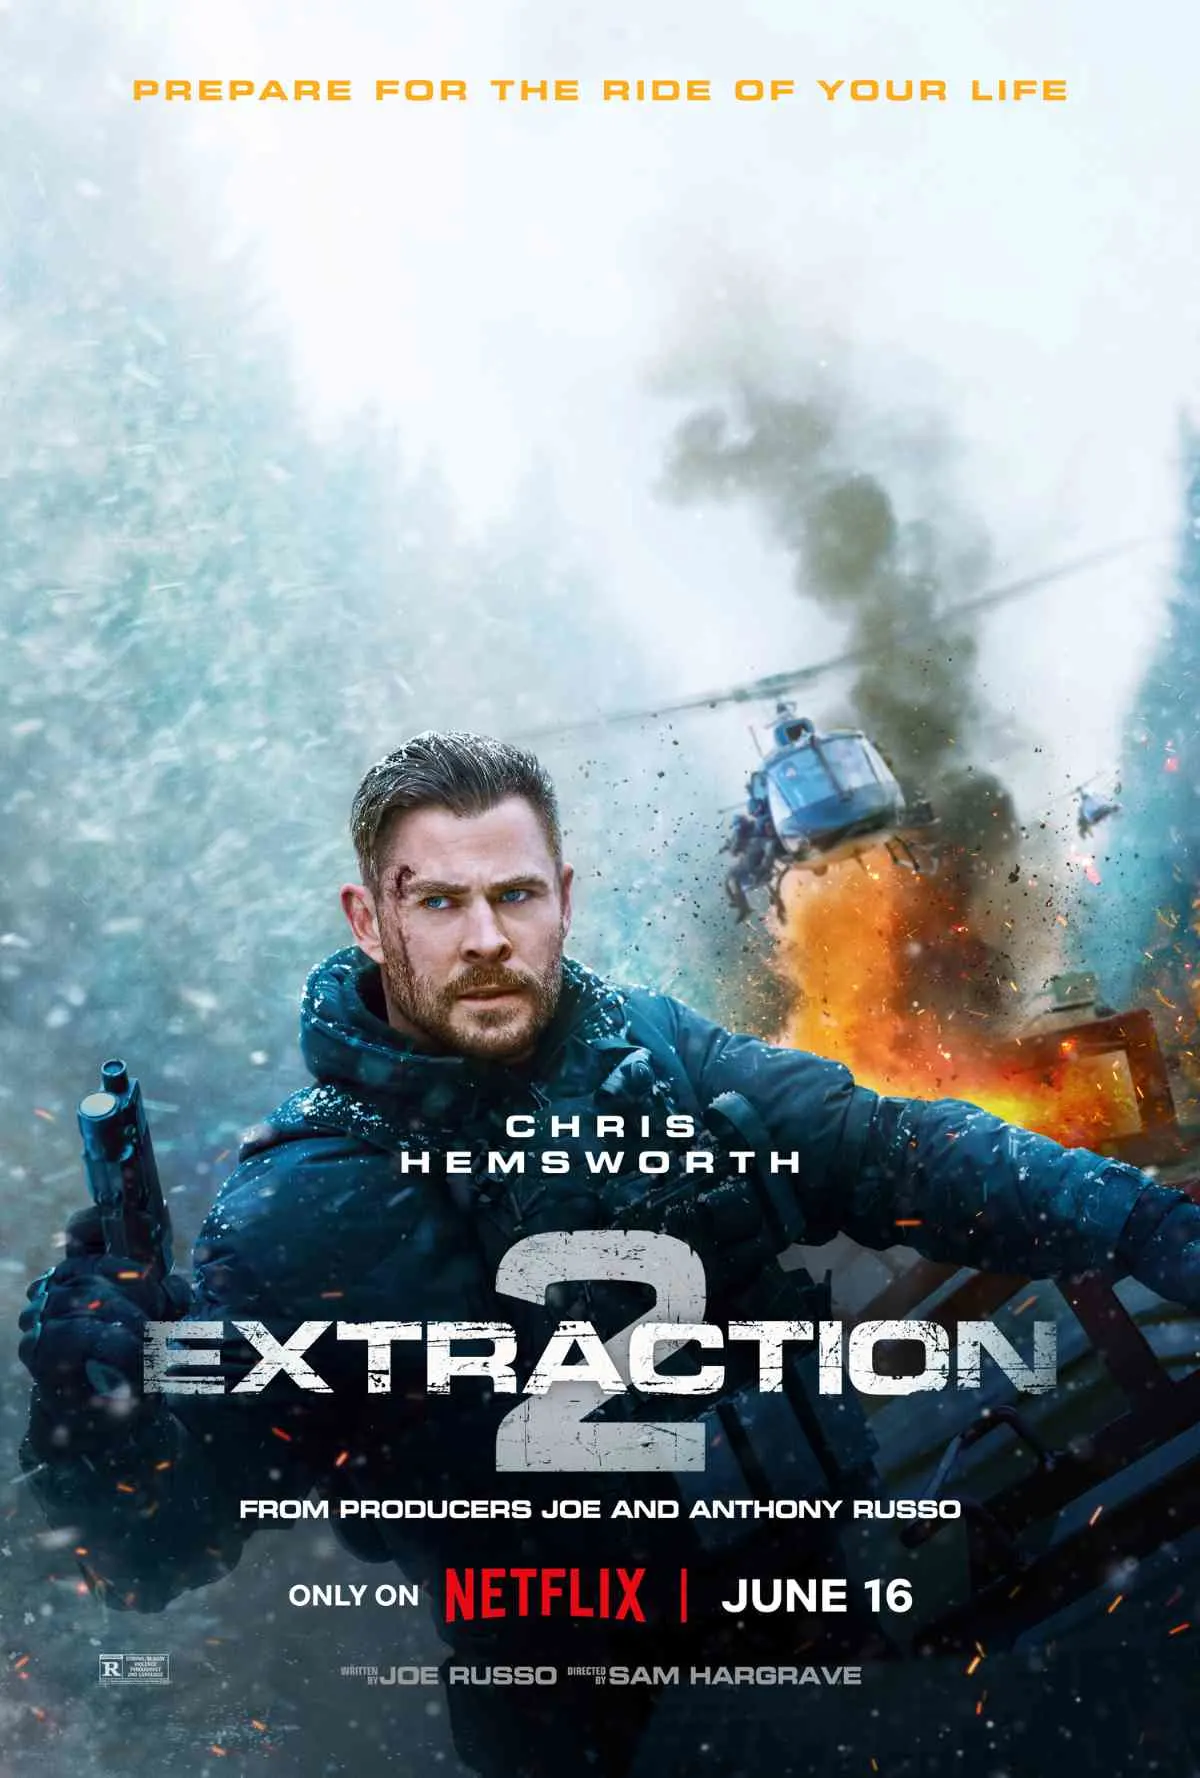 Extraction 2 Trailer and Posters Debut